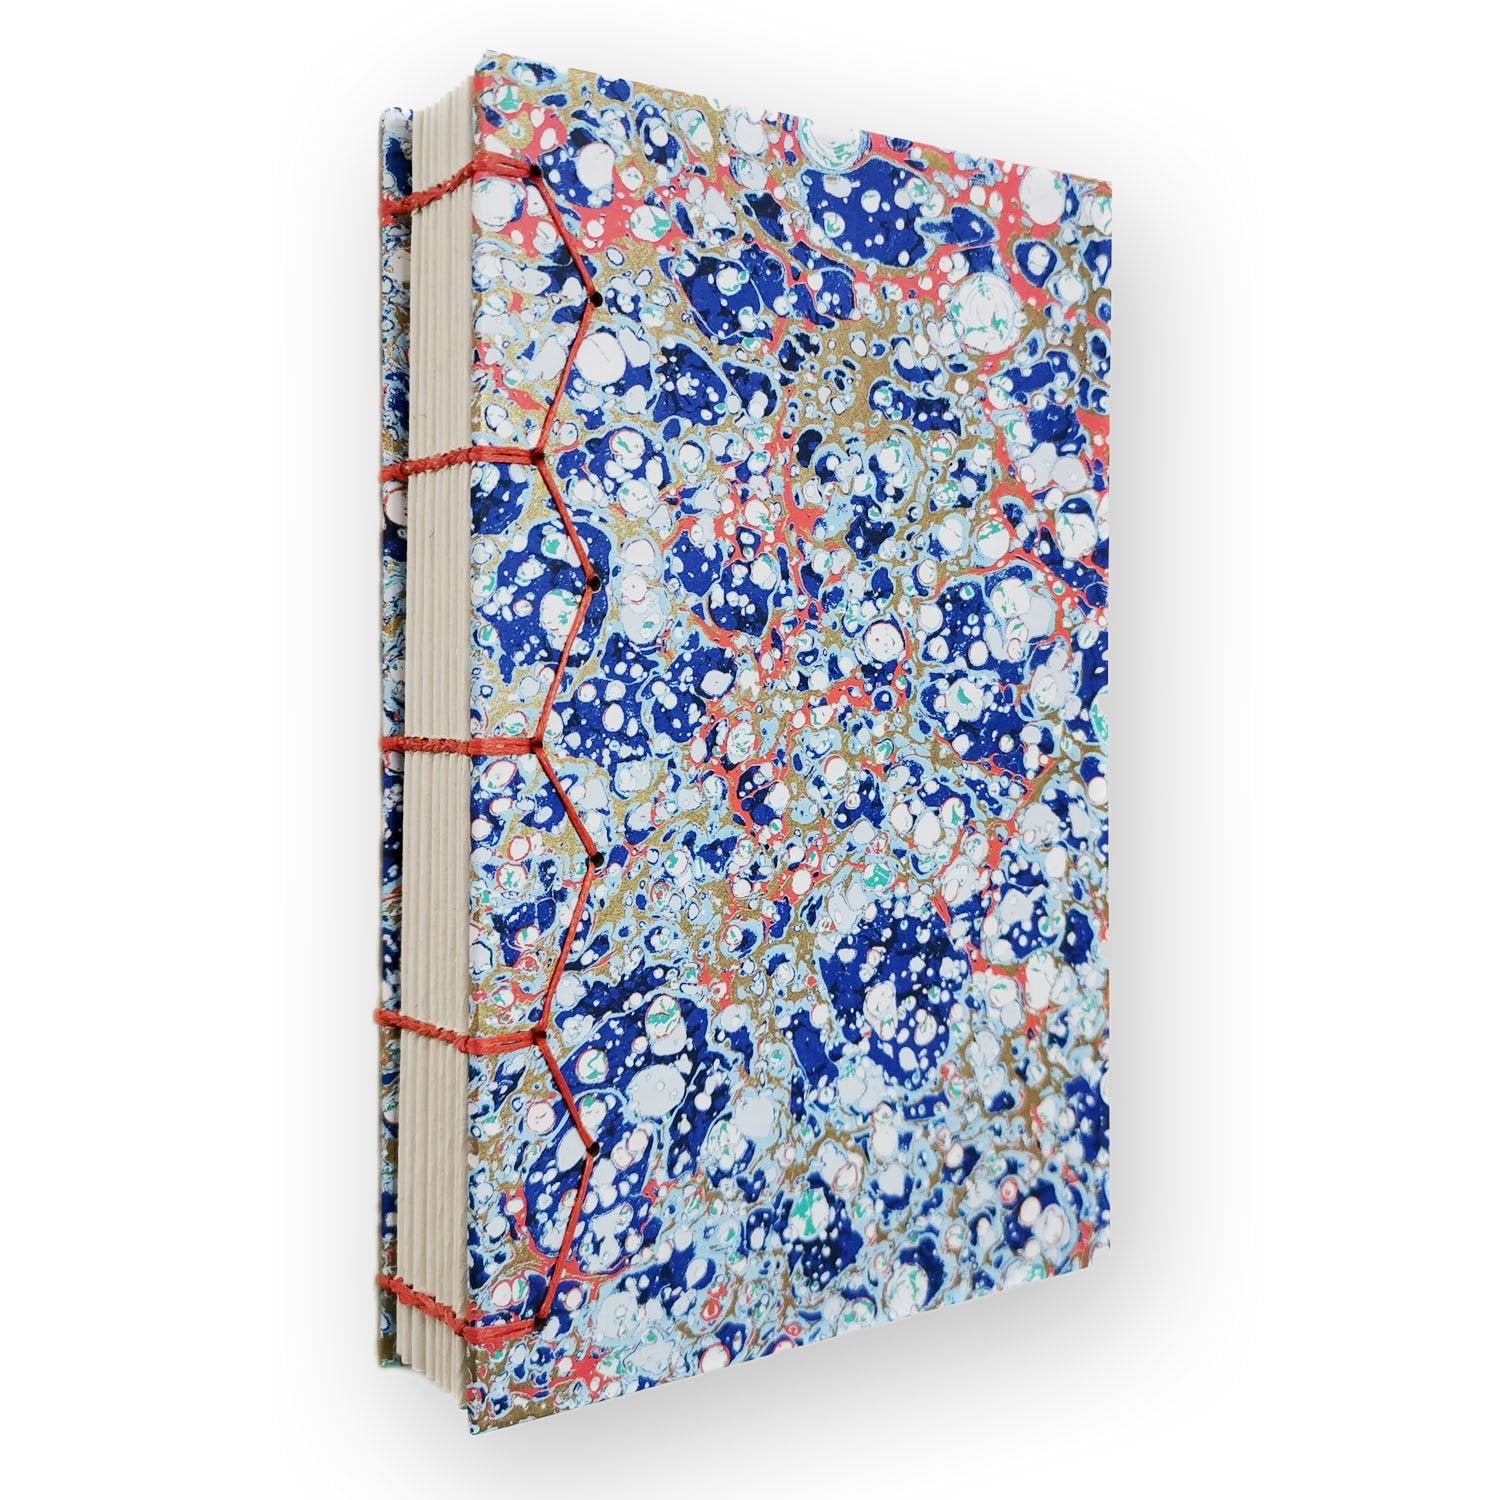 2023 Weekly Calendar with Byzantine Binding - Marbled Blue